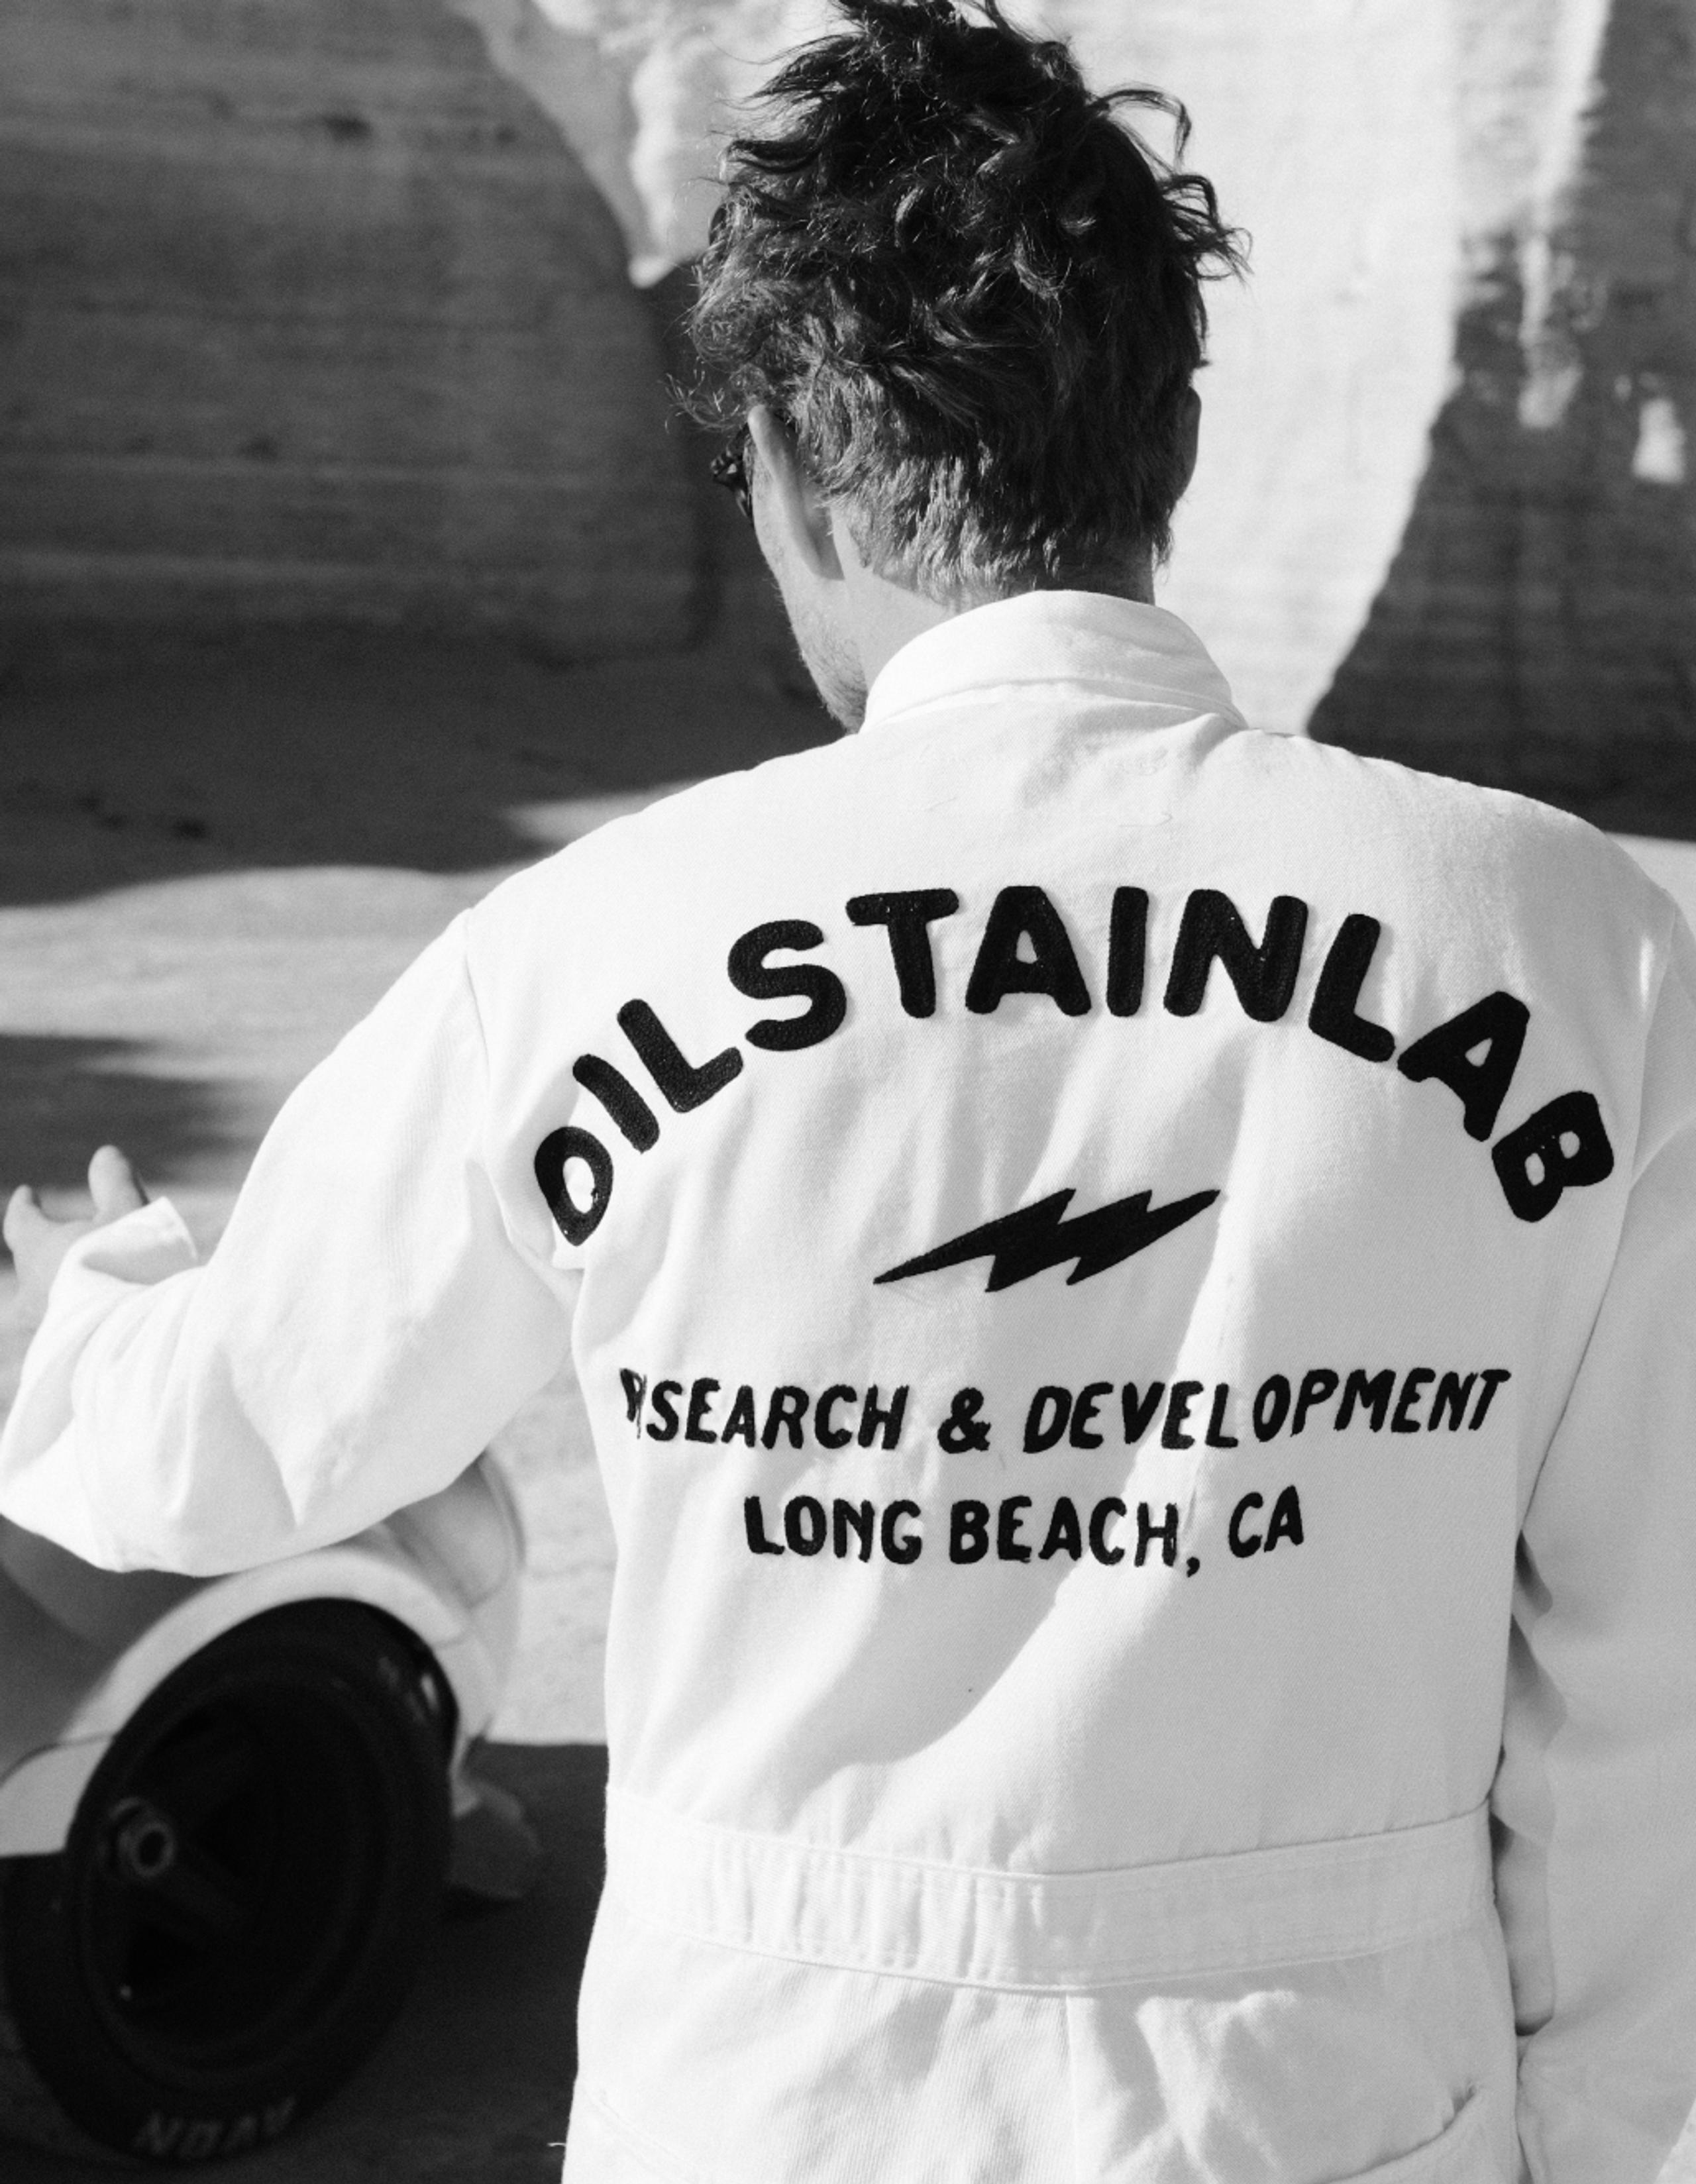 Man wearing race jumpsuit with lettering that says OILSTAINLAB - Research & Development, Long Beach CA